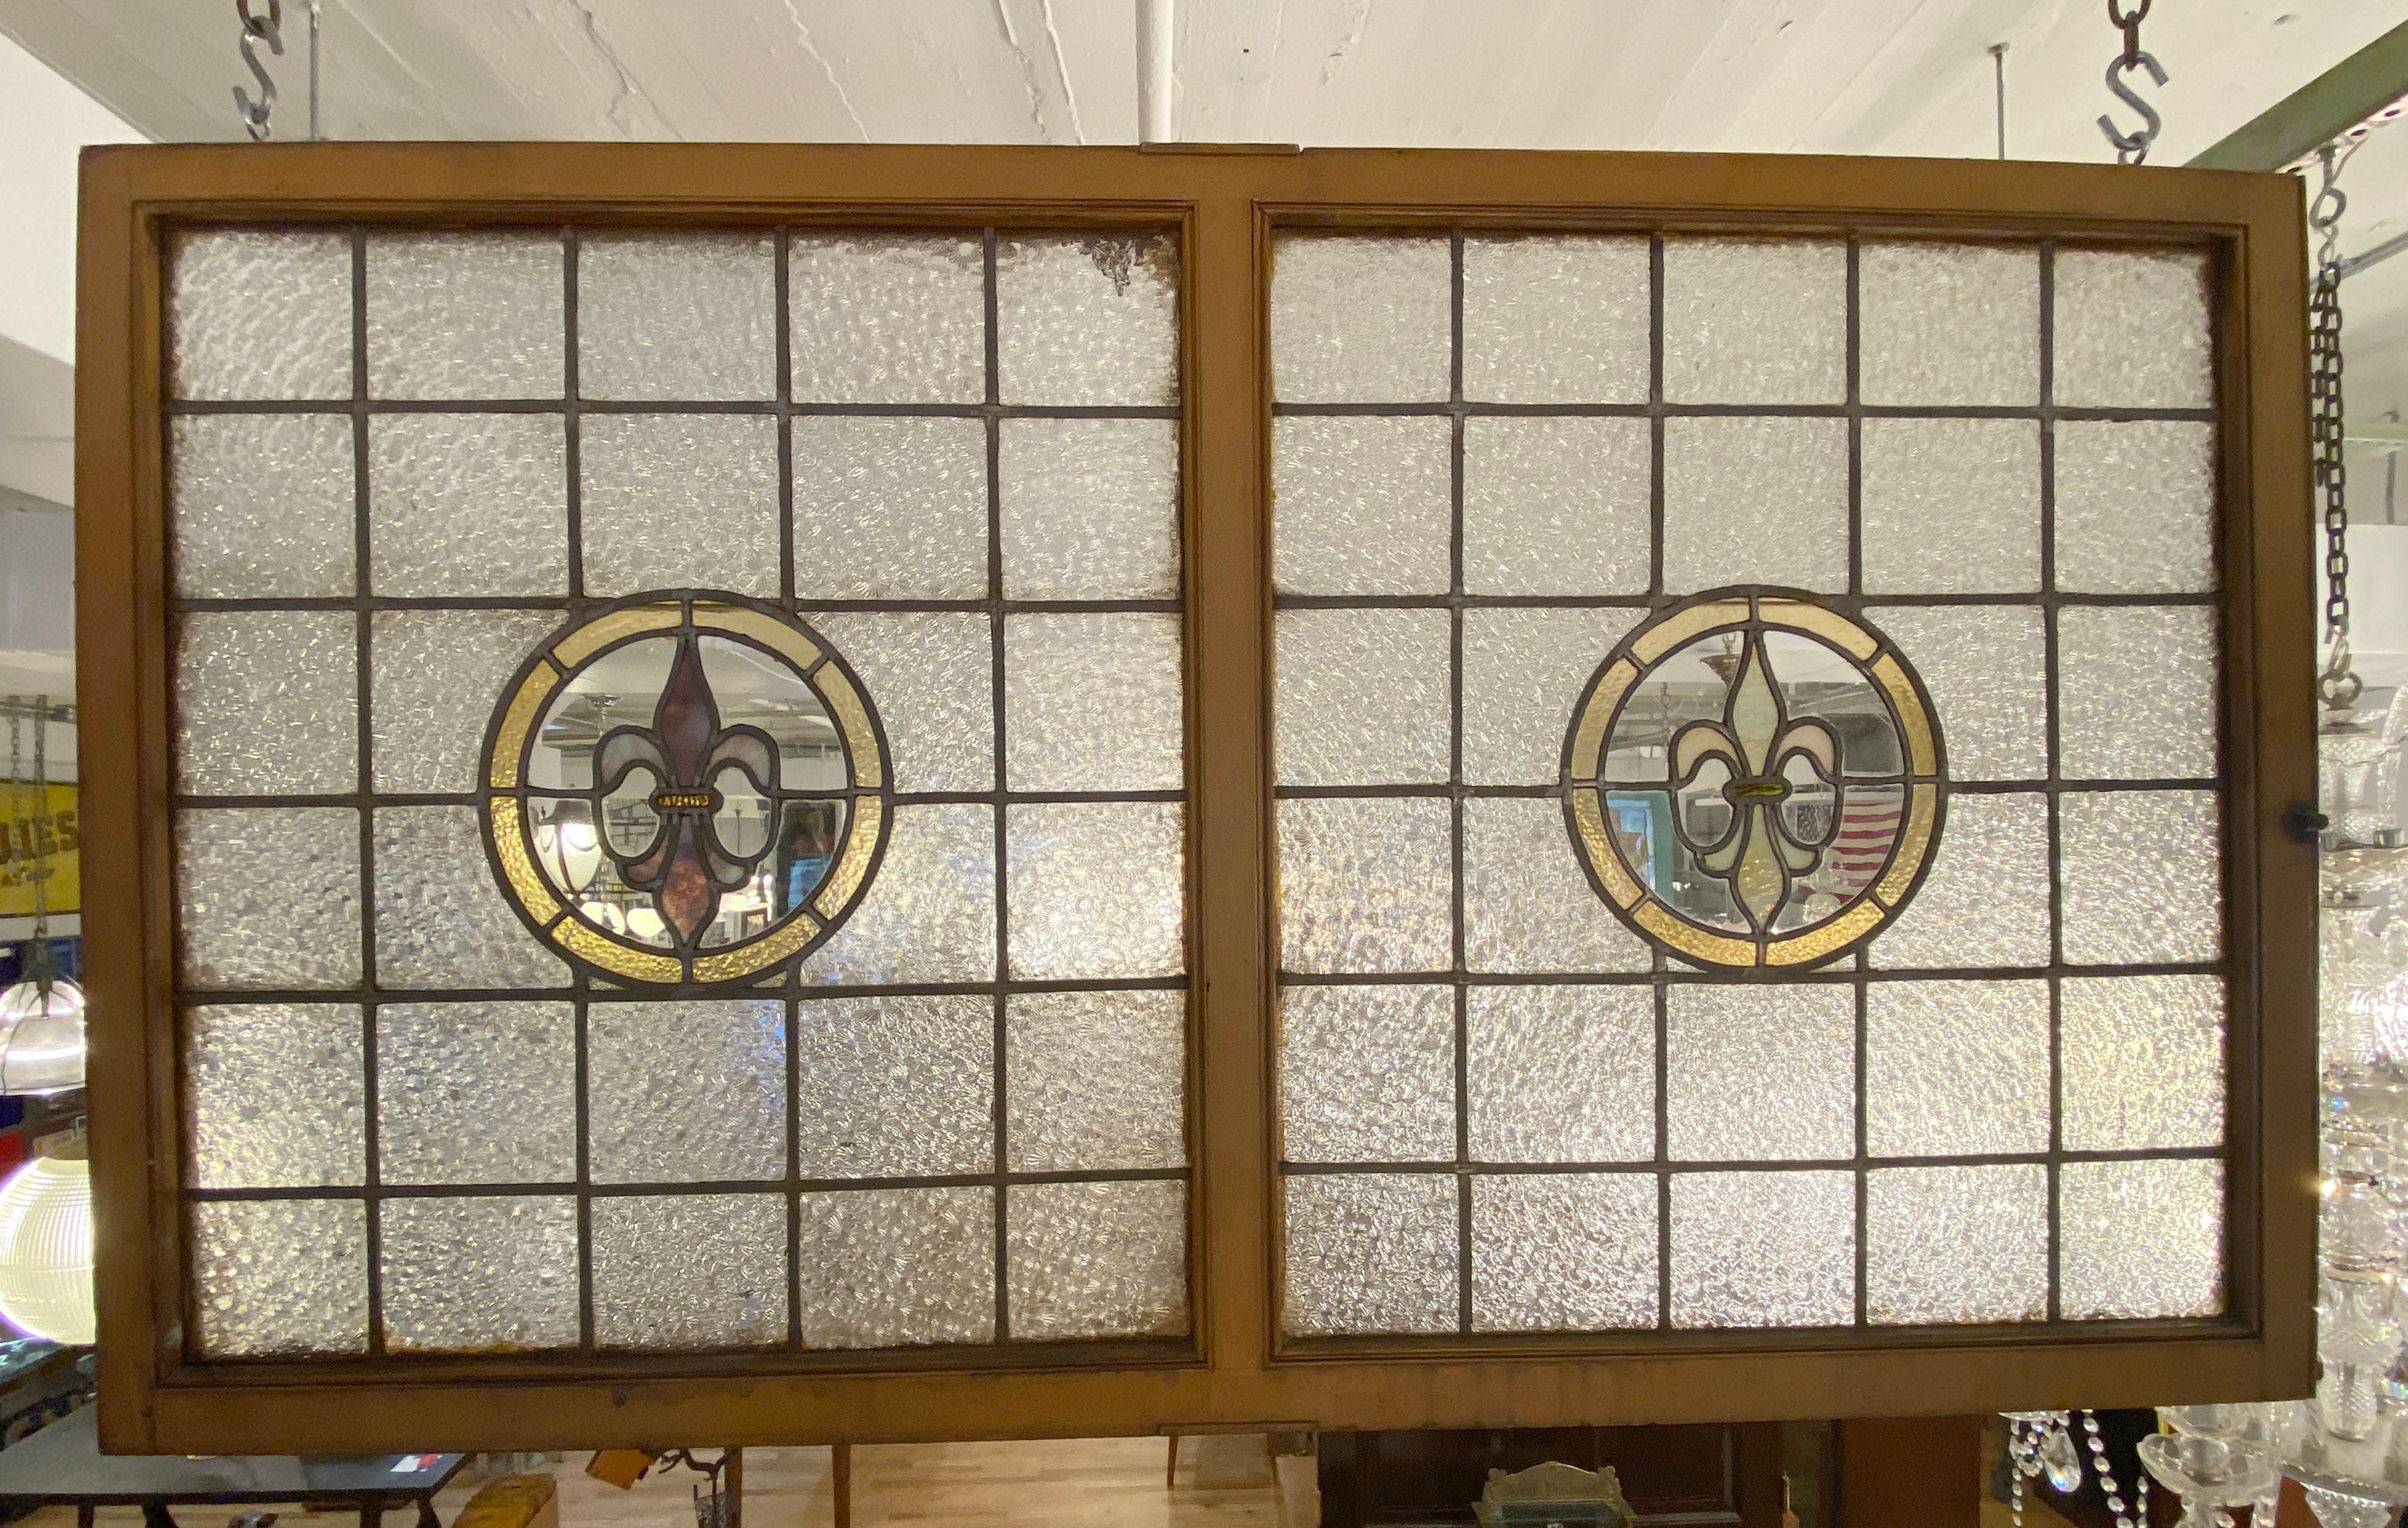 This antique double stained leaded glass window once graced the interior of the Grand Prospect Hall in Brooklyn, NY. It features two sides each with clear Florentine patterned square glass panels and the center has a yellow circle around an